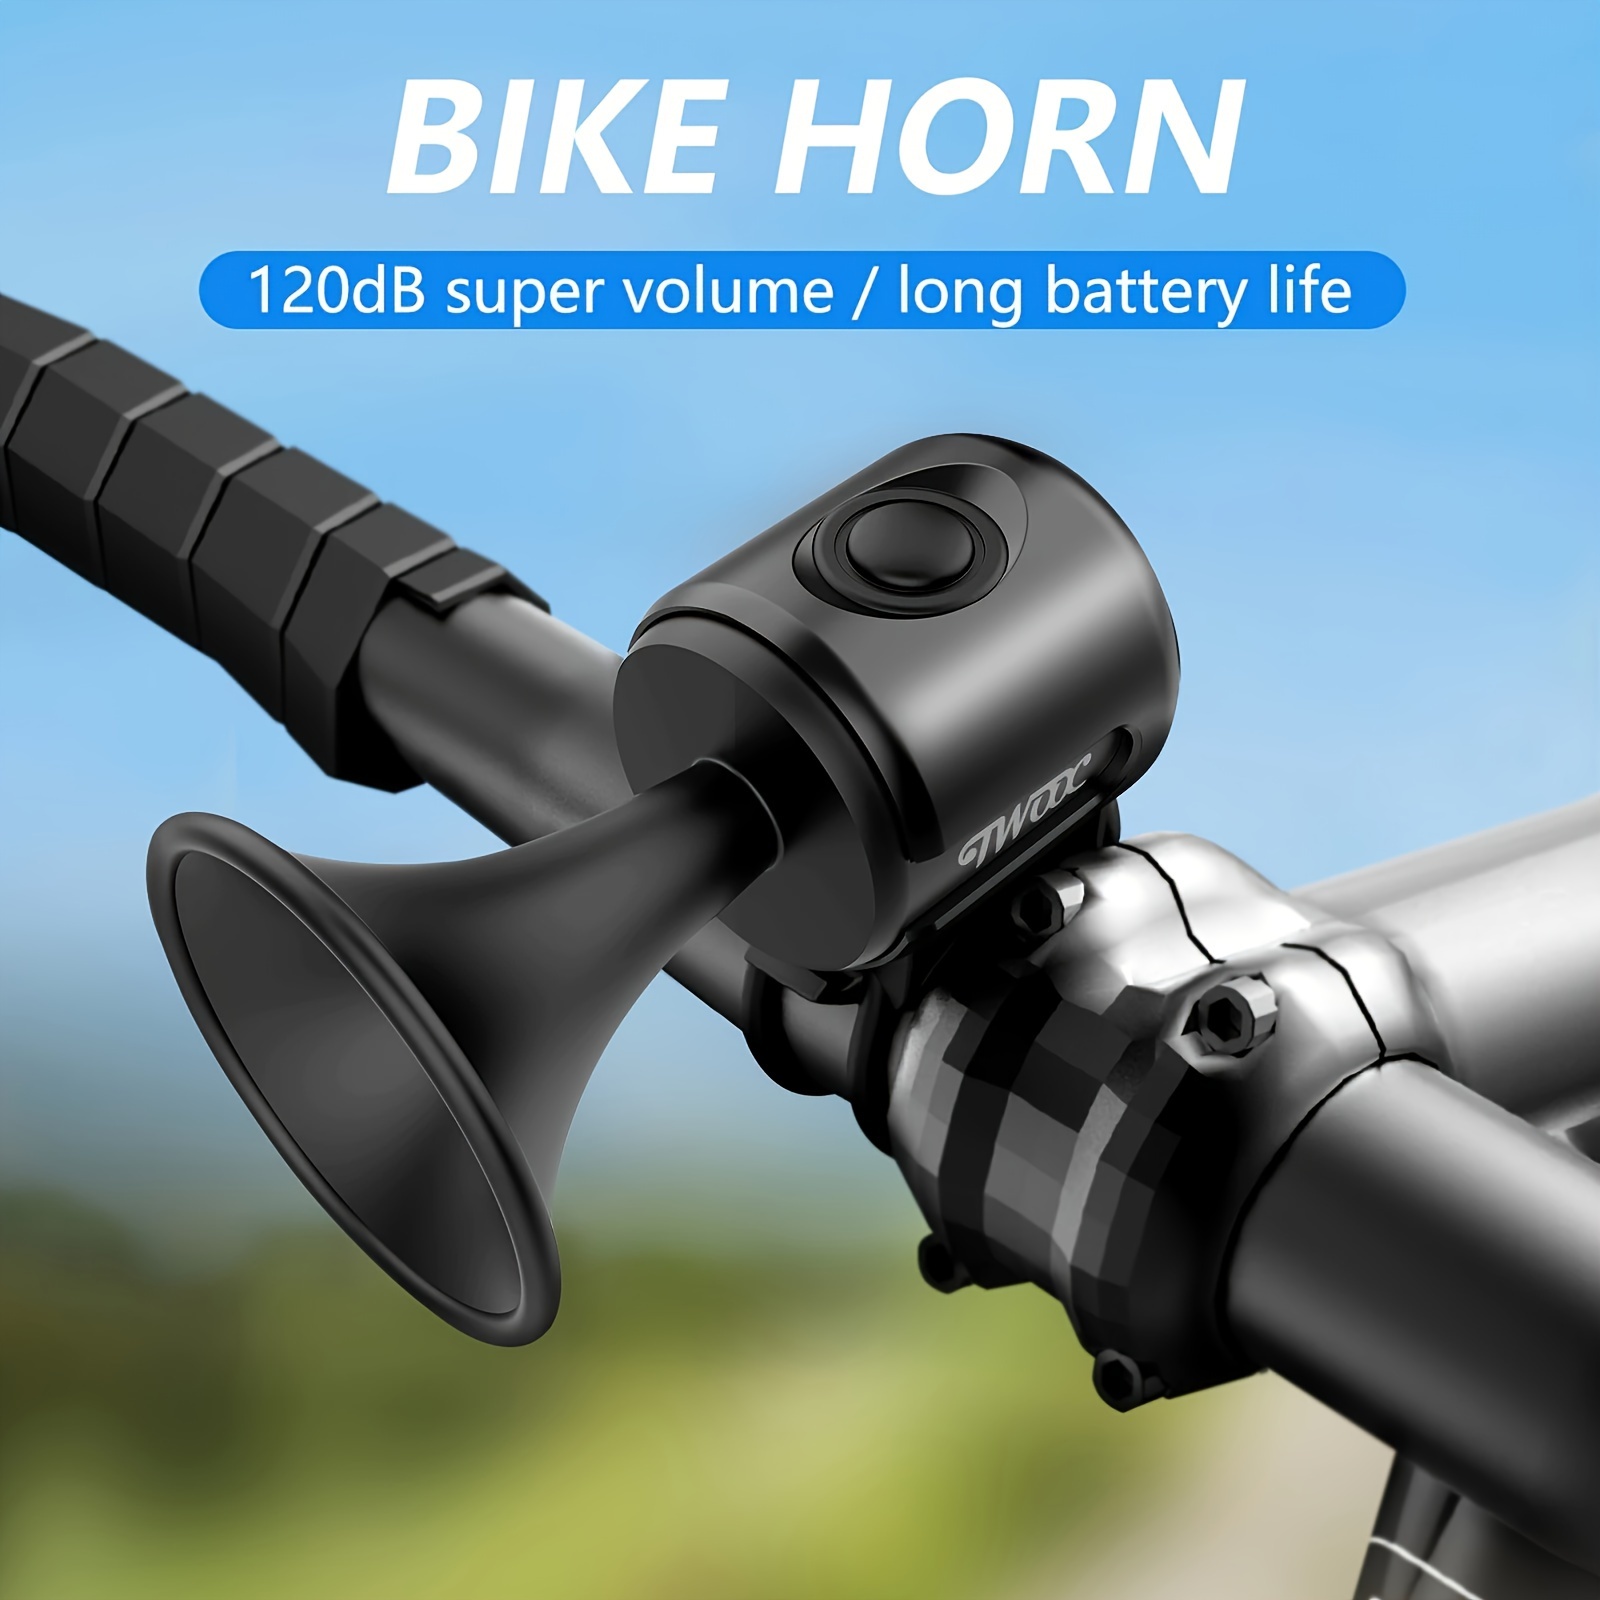 

1pc Plastic Bicycle Bell, Modern Style, Bike Safety Warning Alarm, Cycling Handlebar Bell Ring, Bicycle Horn, Cycling Accessories For Road Bikes And Mountain Bikes